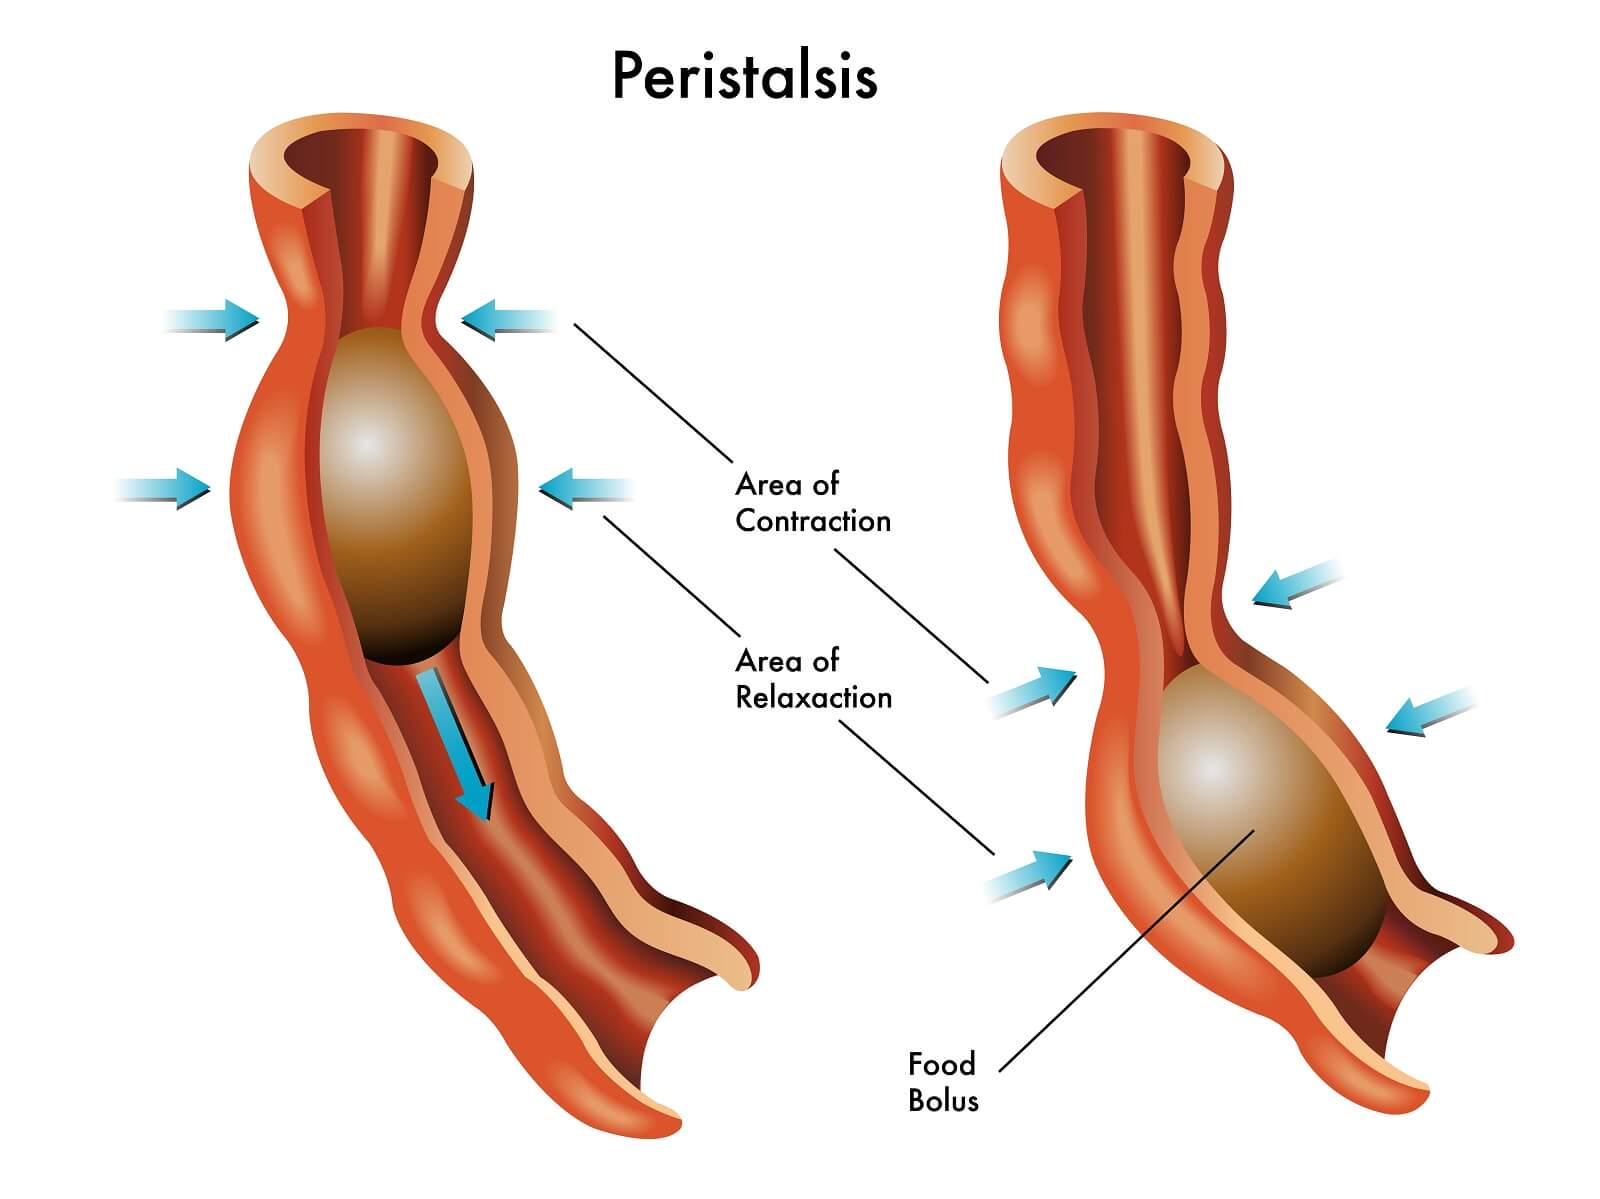 A diagram of peristalsis, which is the movement of food through the intestines by involuntary muscle contraction and relaxation.